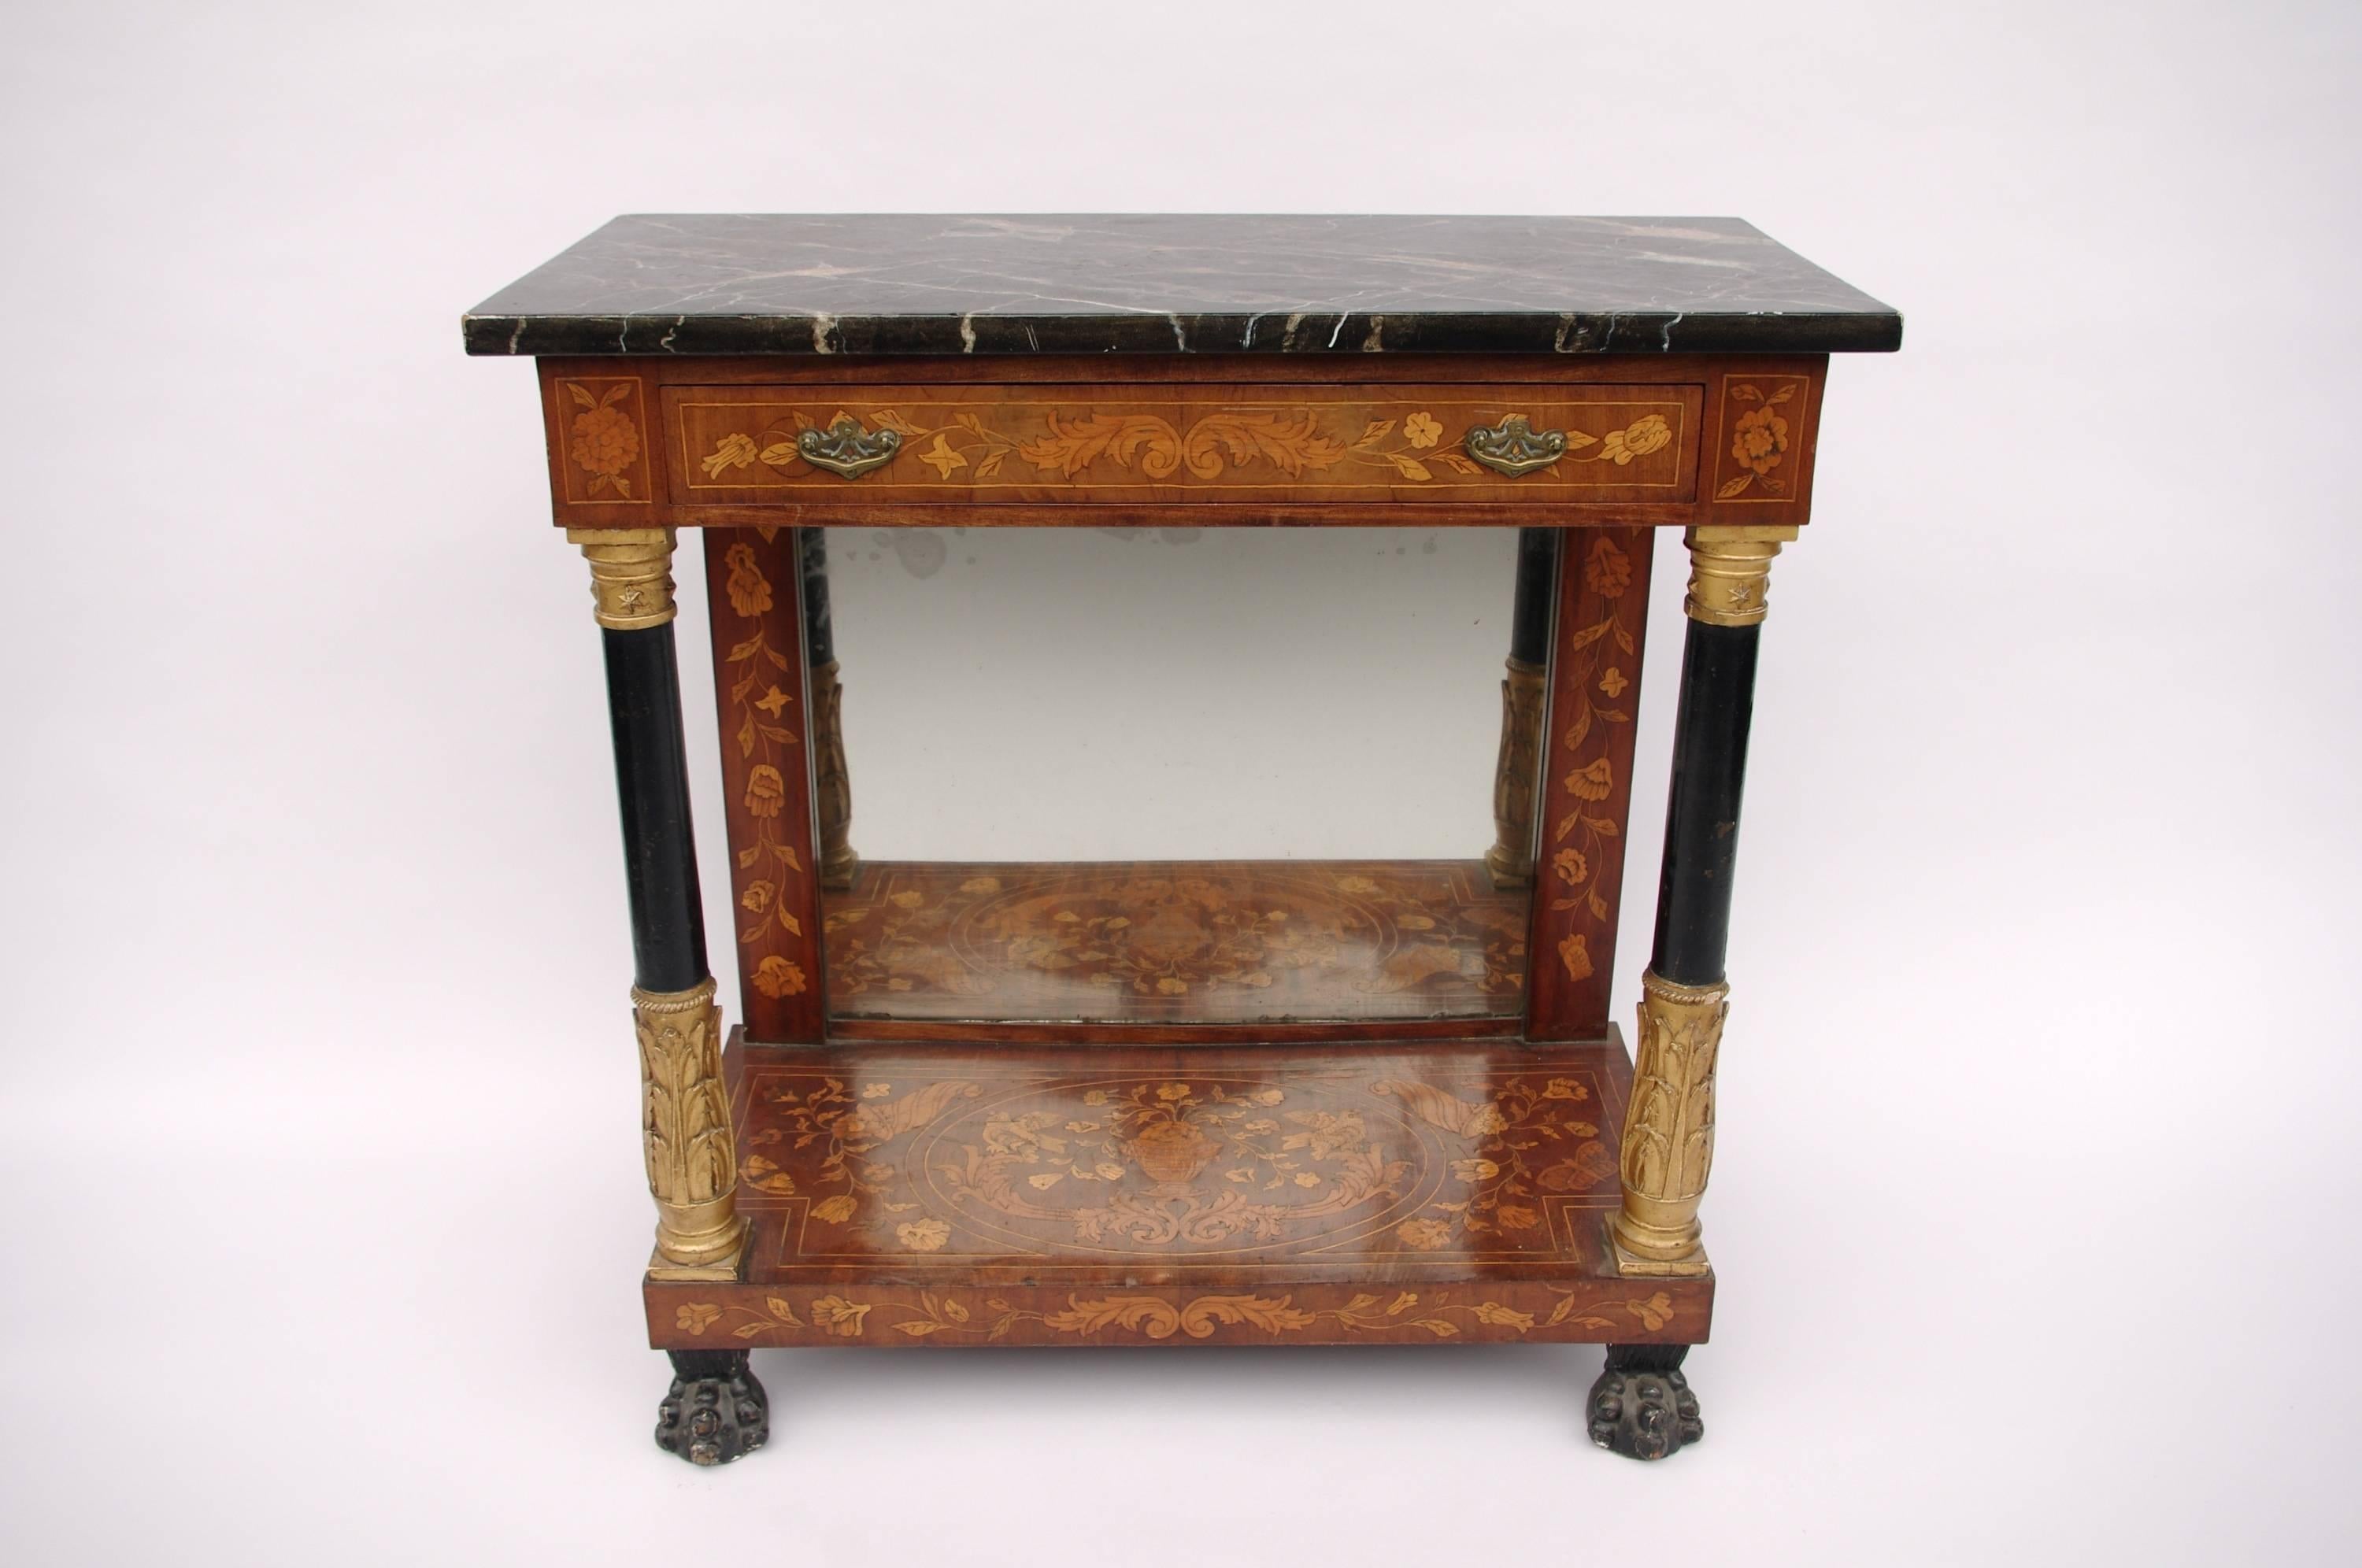 Faux marble painted top.
Dutch work.
Marquetry.
Glass part.
Beginning of the 19th century.
Opening in one drawer.